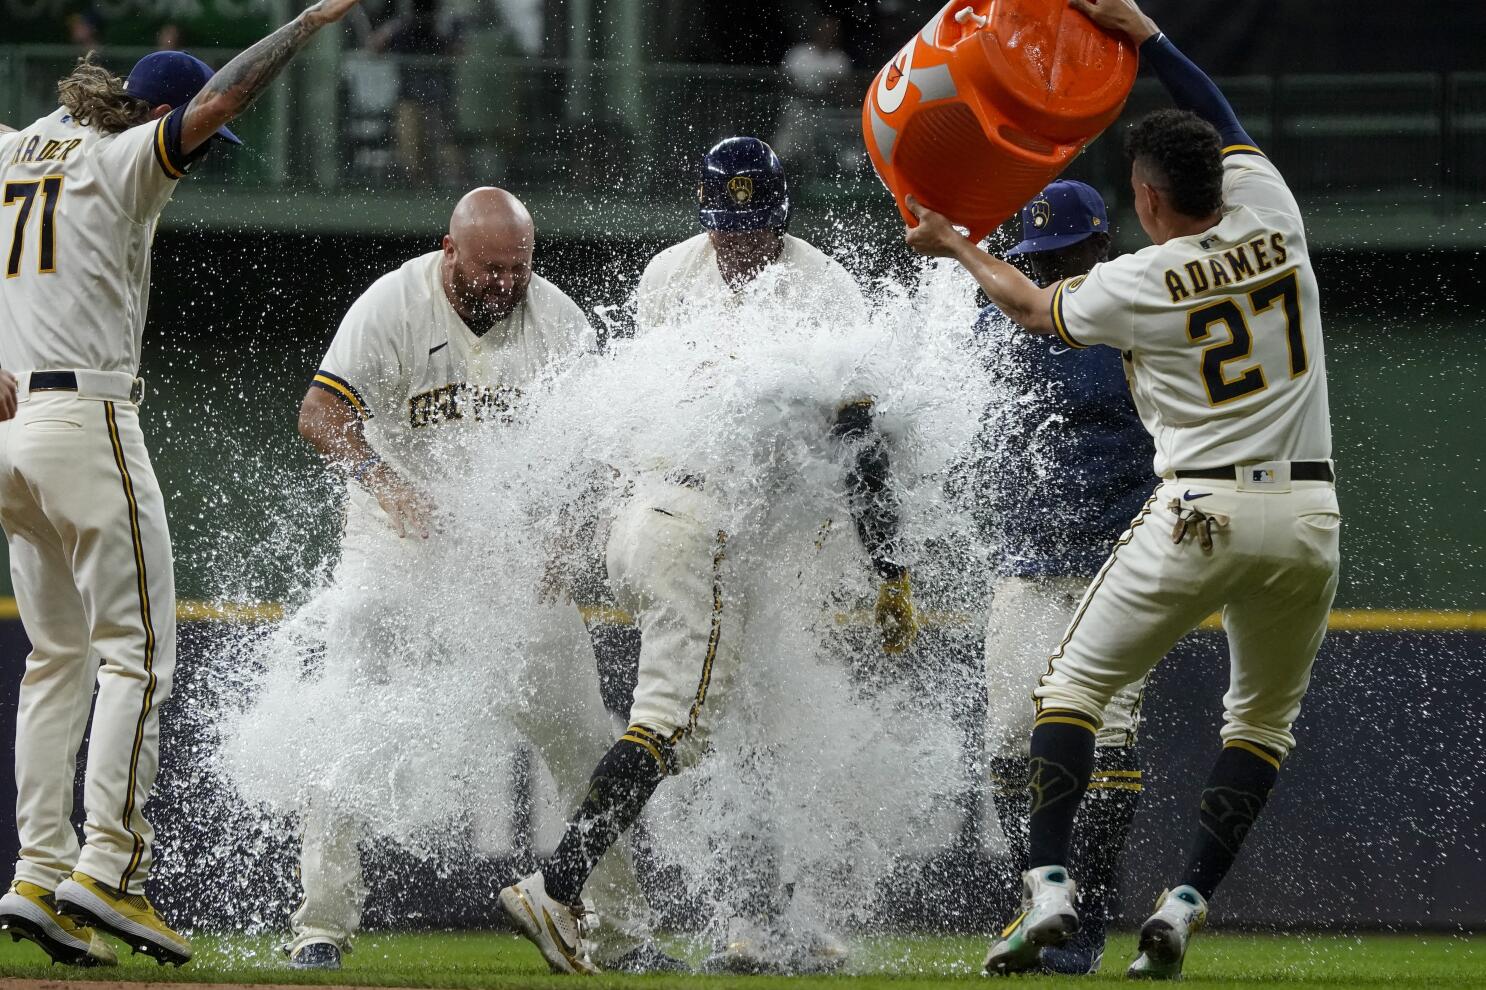 McCutchen rallies Brewers past Pirates 3-2 to complete sweep